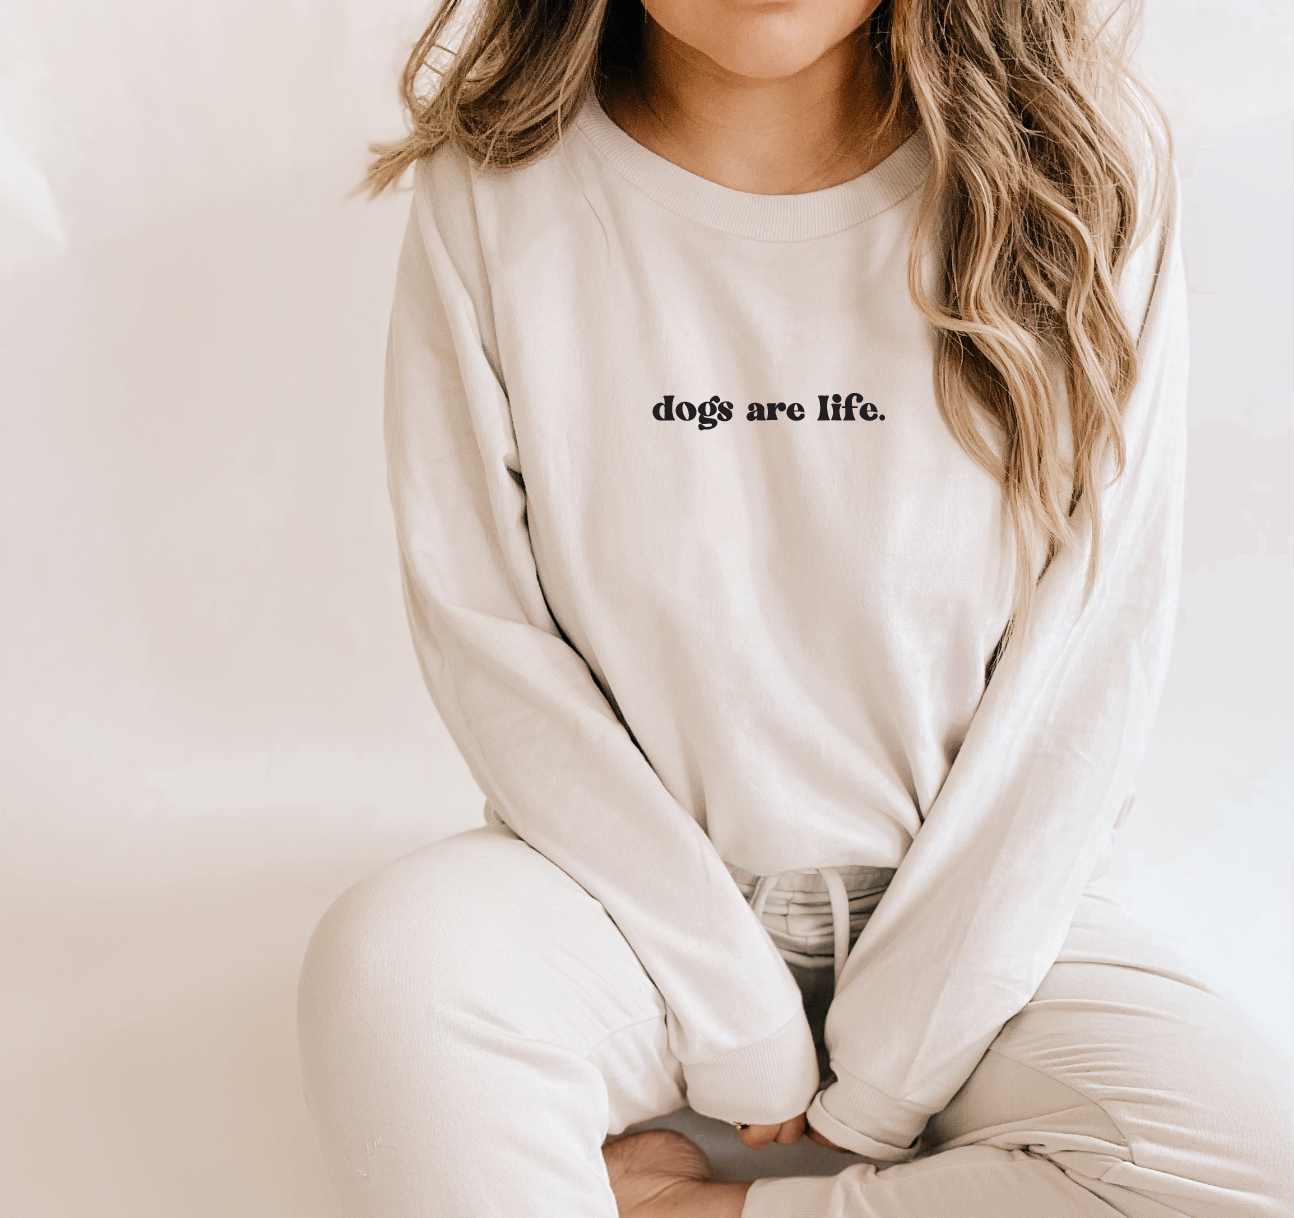 Saved by Grace Co. - dogs are life - Long Sleeved Tee